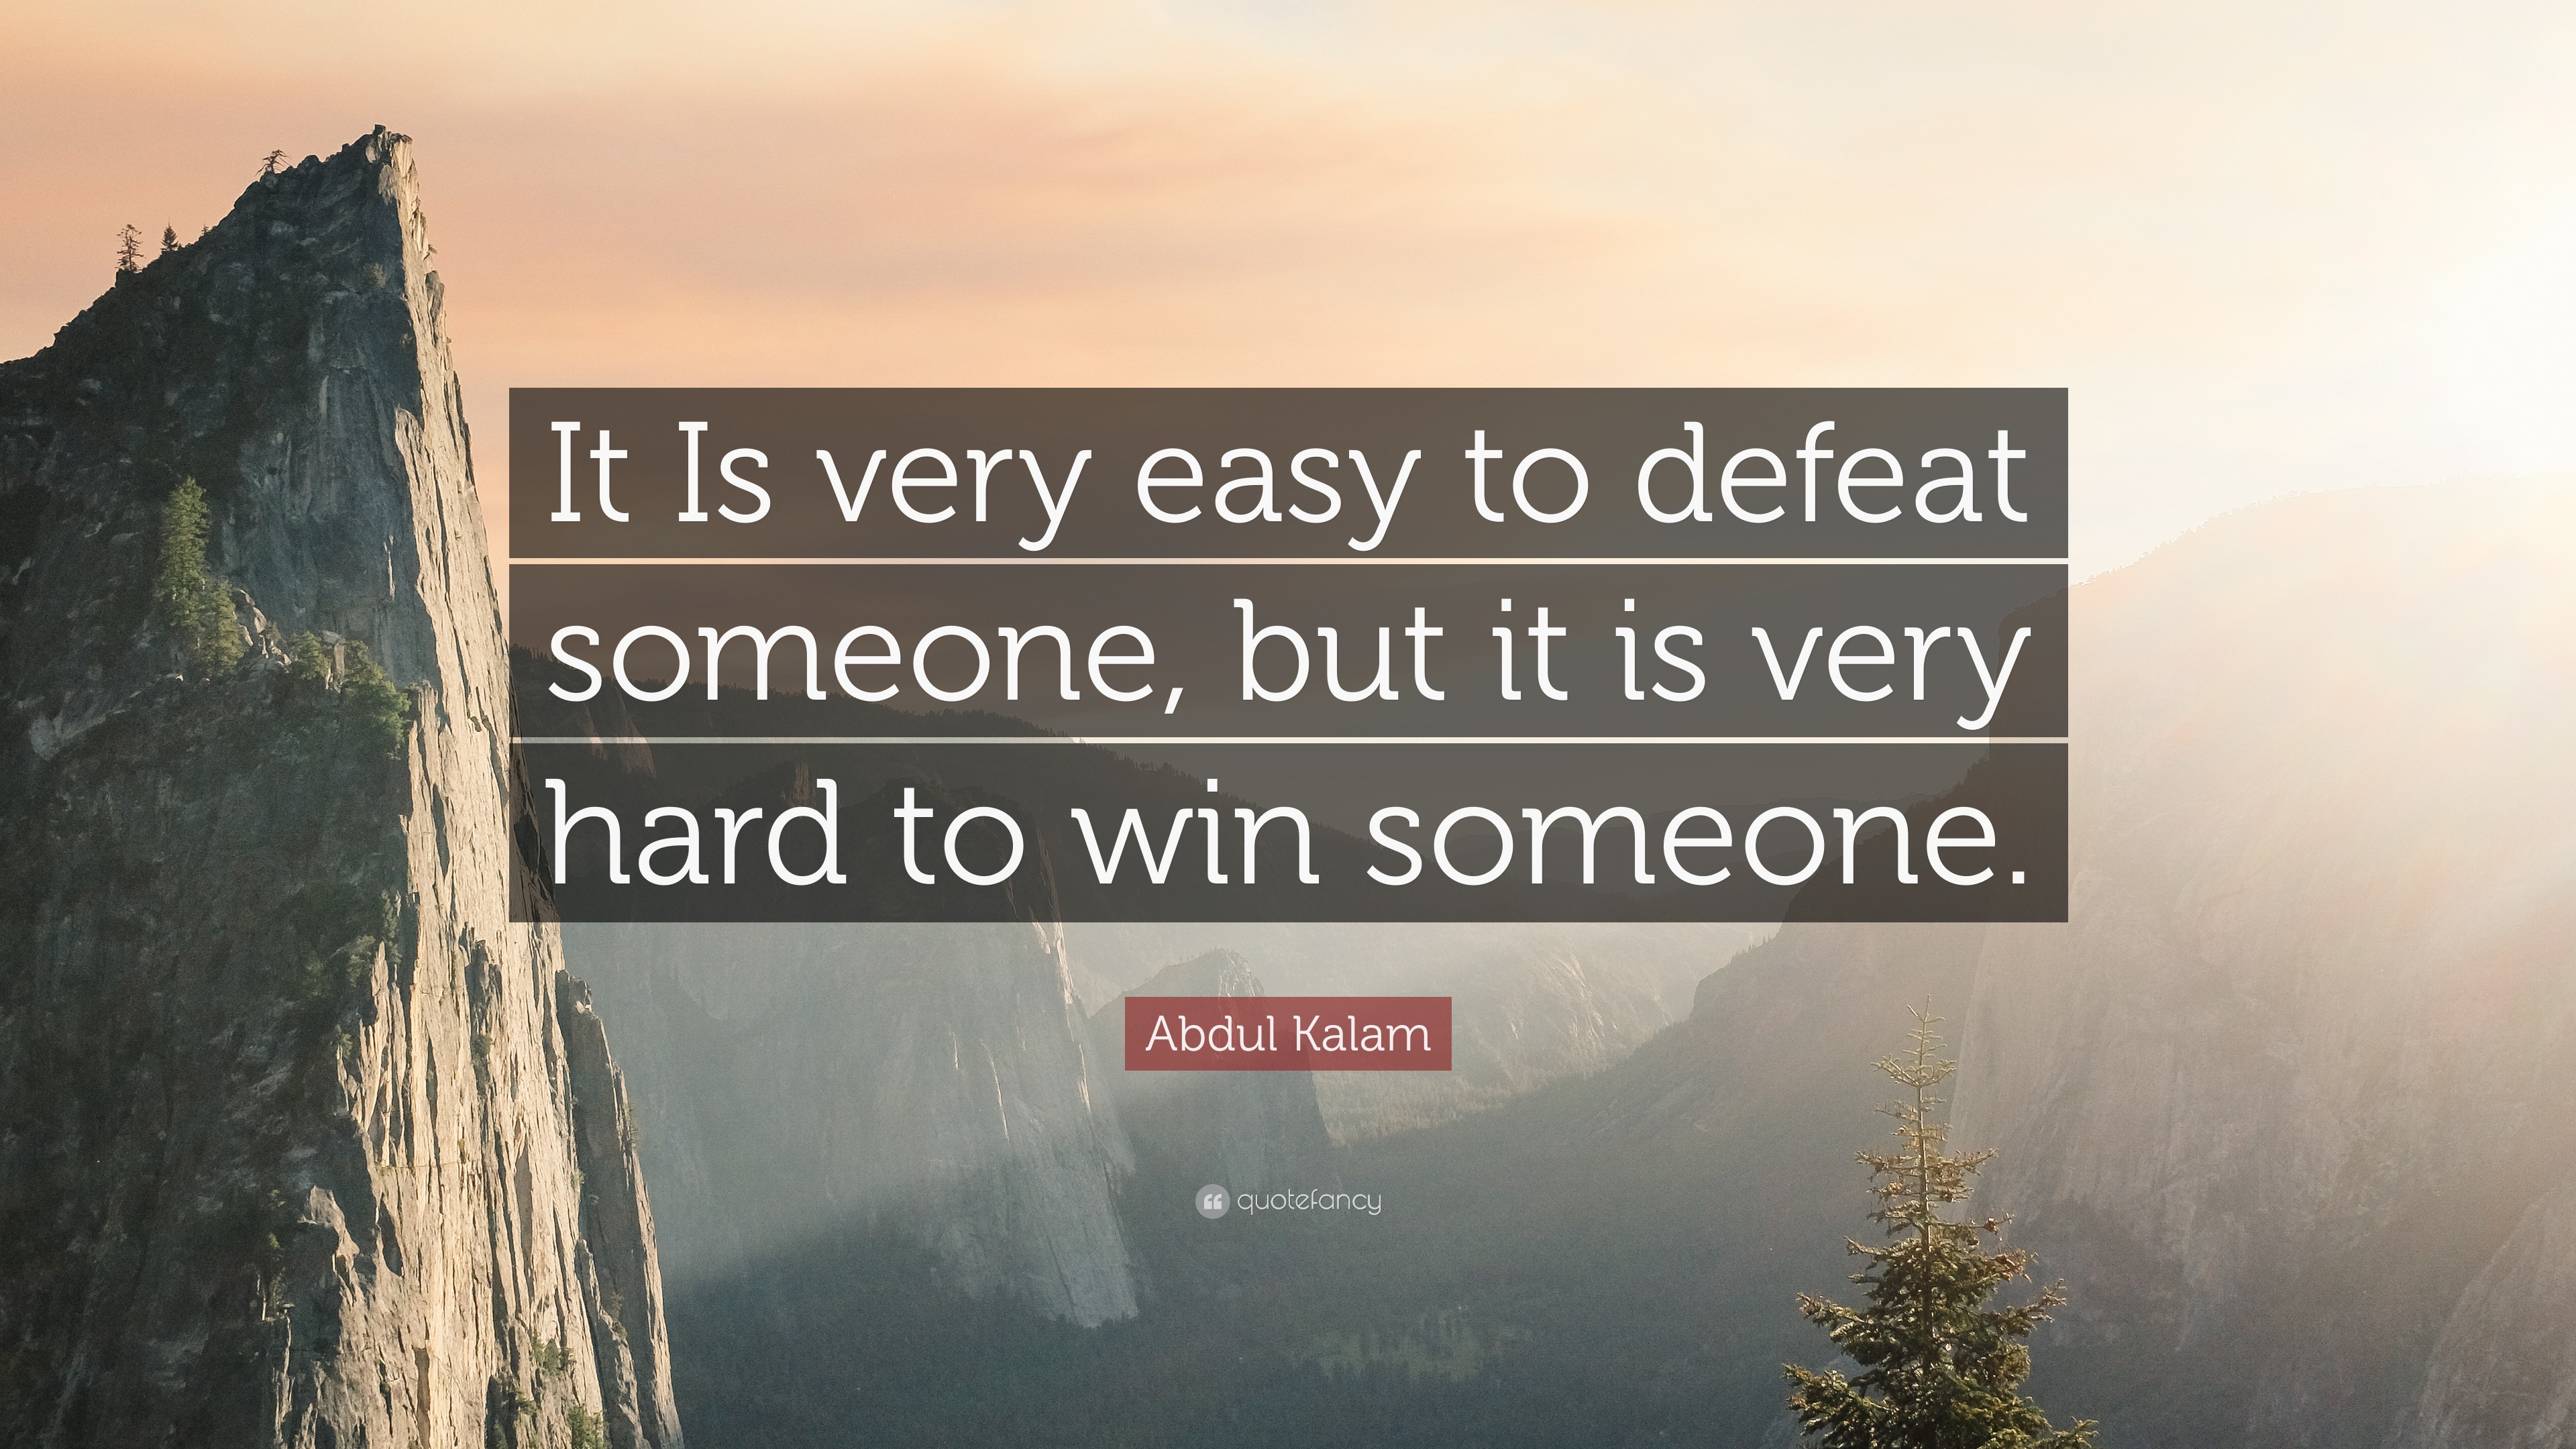 Abdul Kalam Quote: “It Is very easy to defeat someone, but it is very hard  to